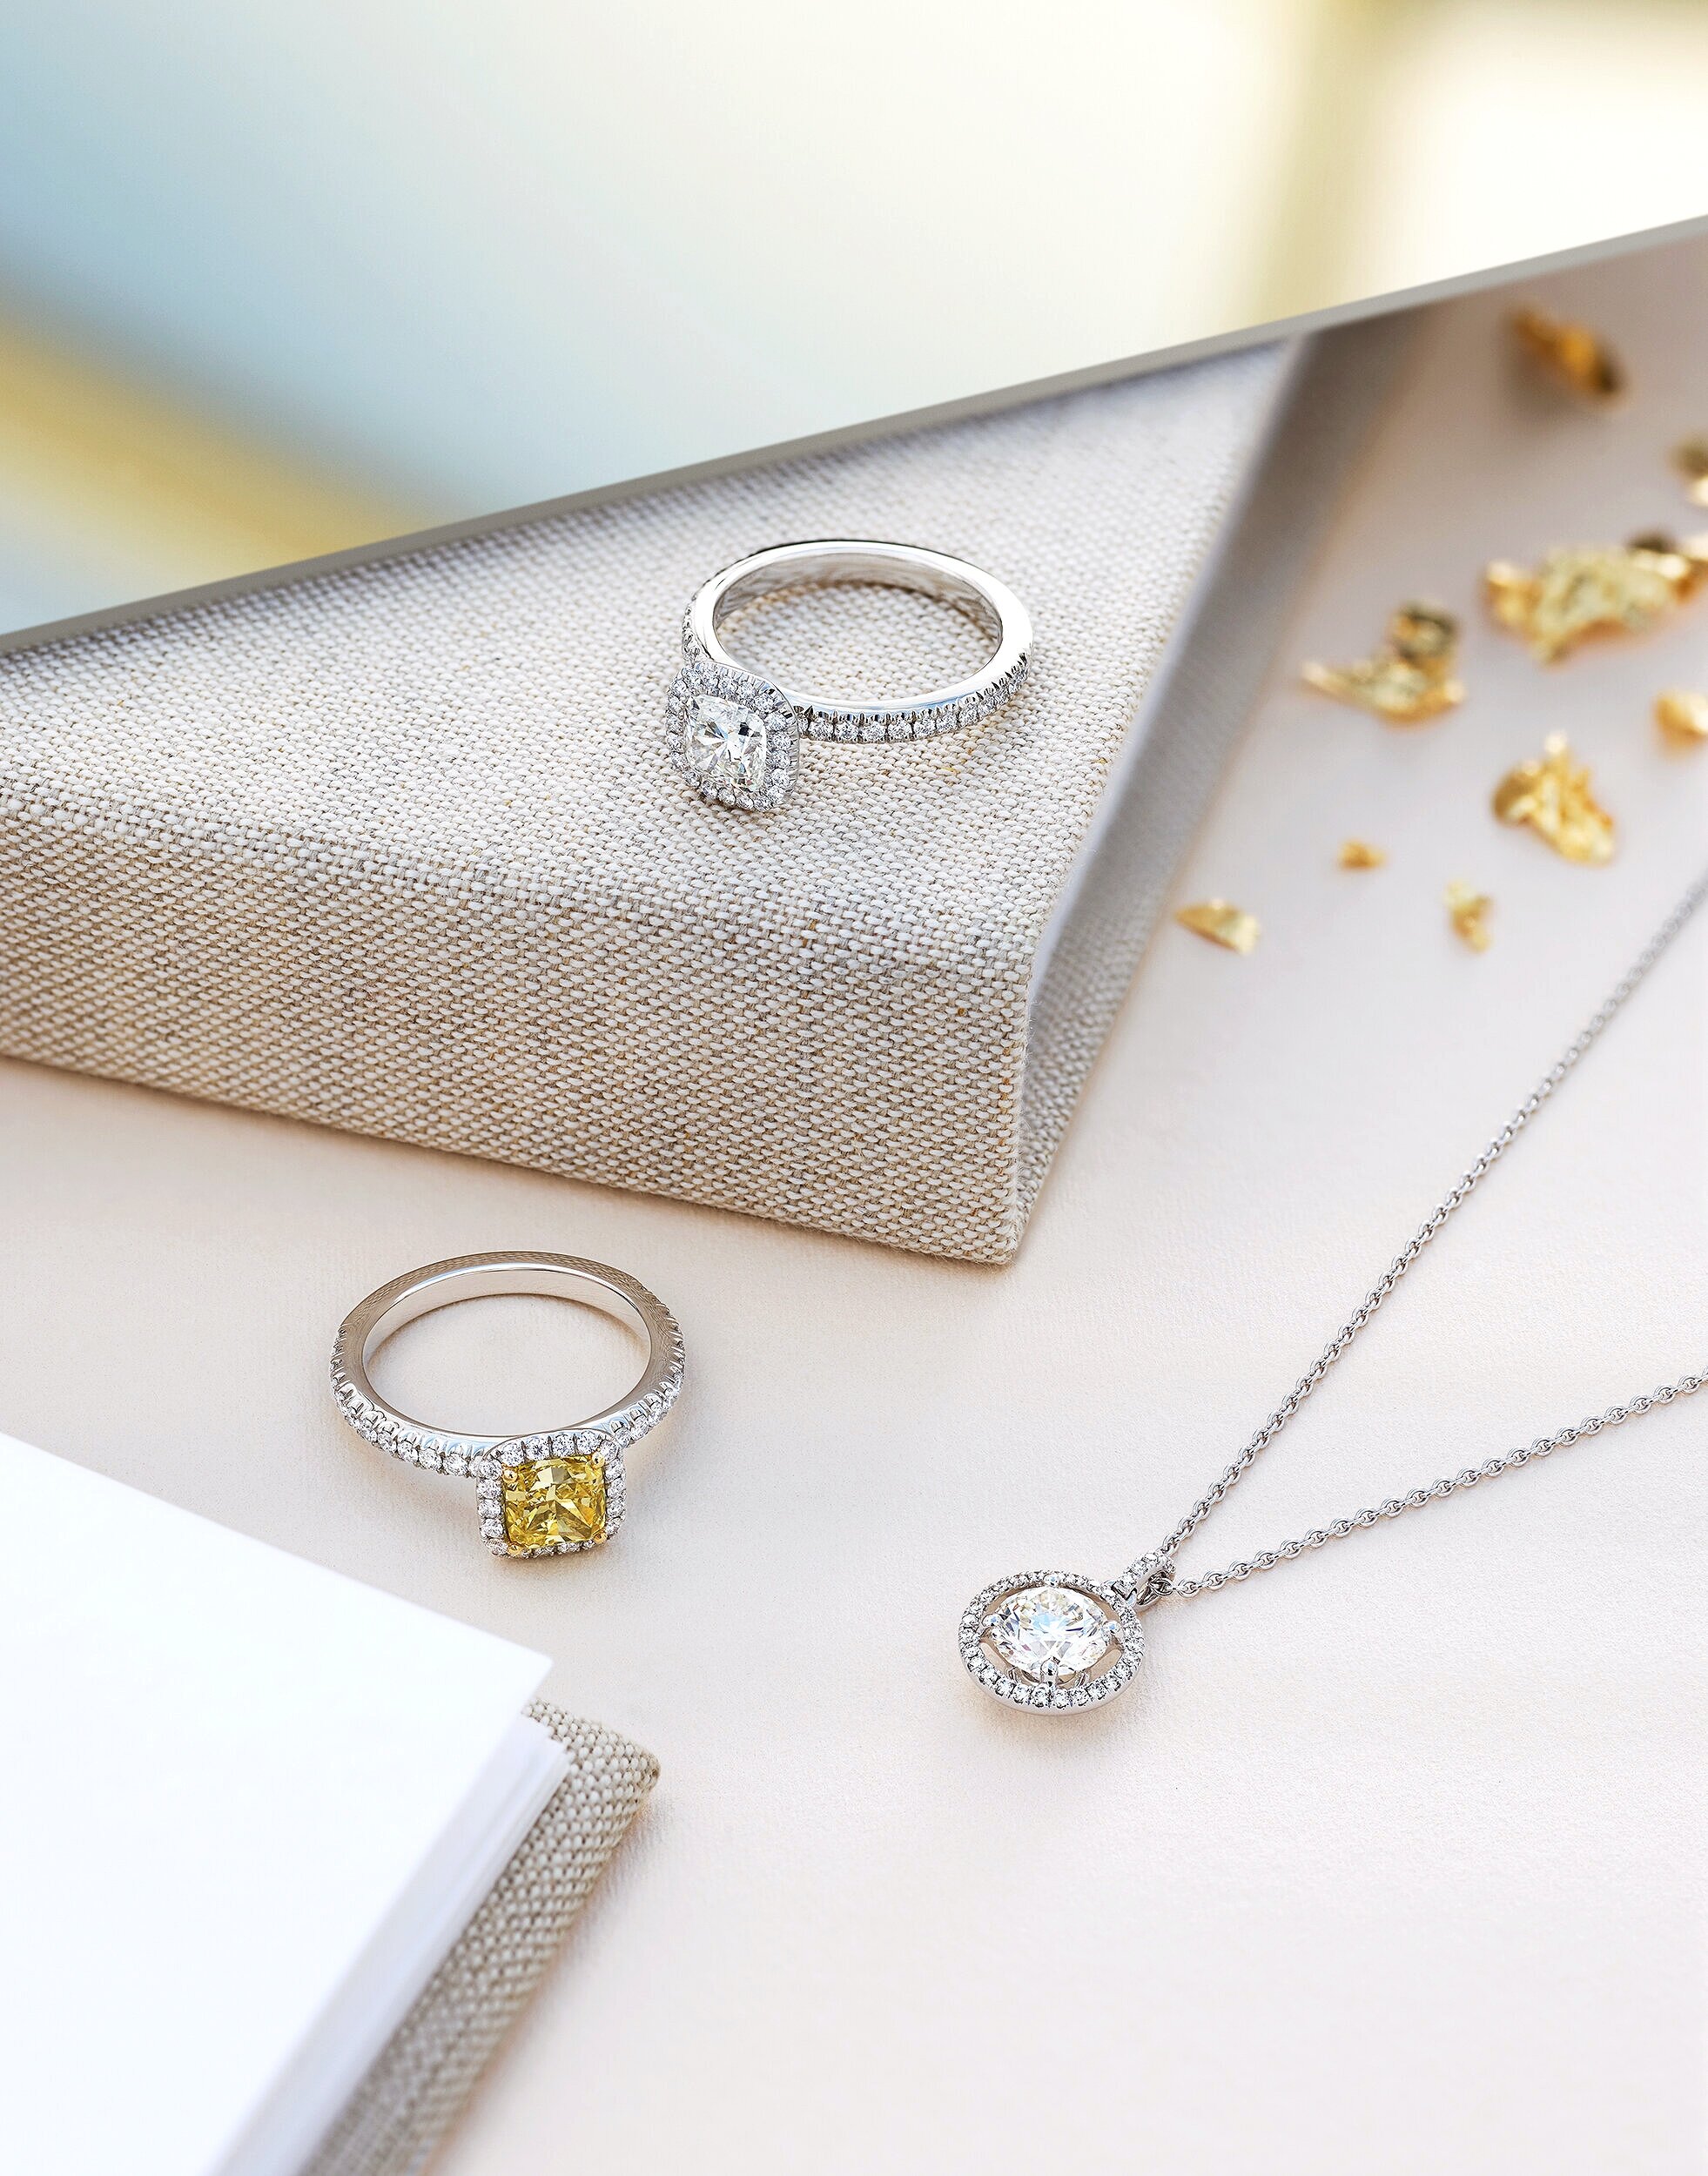  Diamond rings and pendant shot for De Beers 